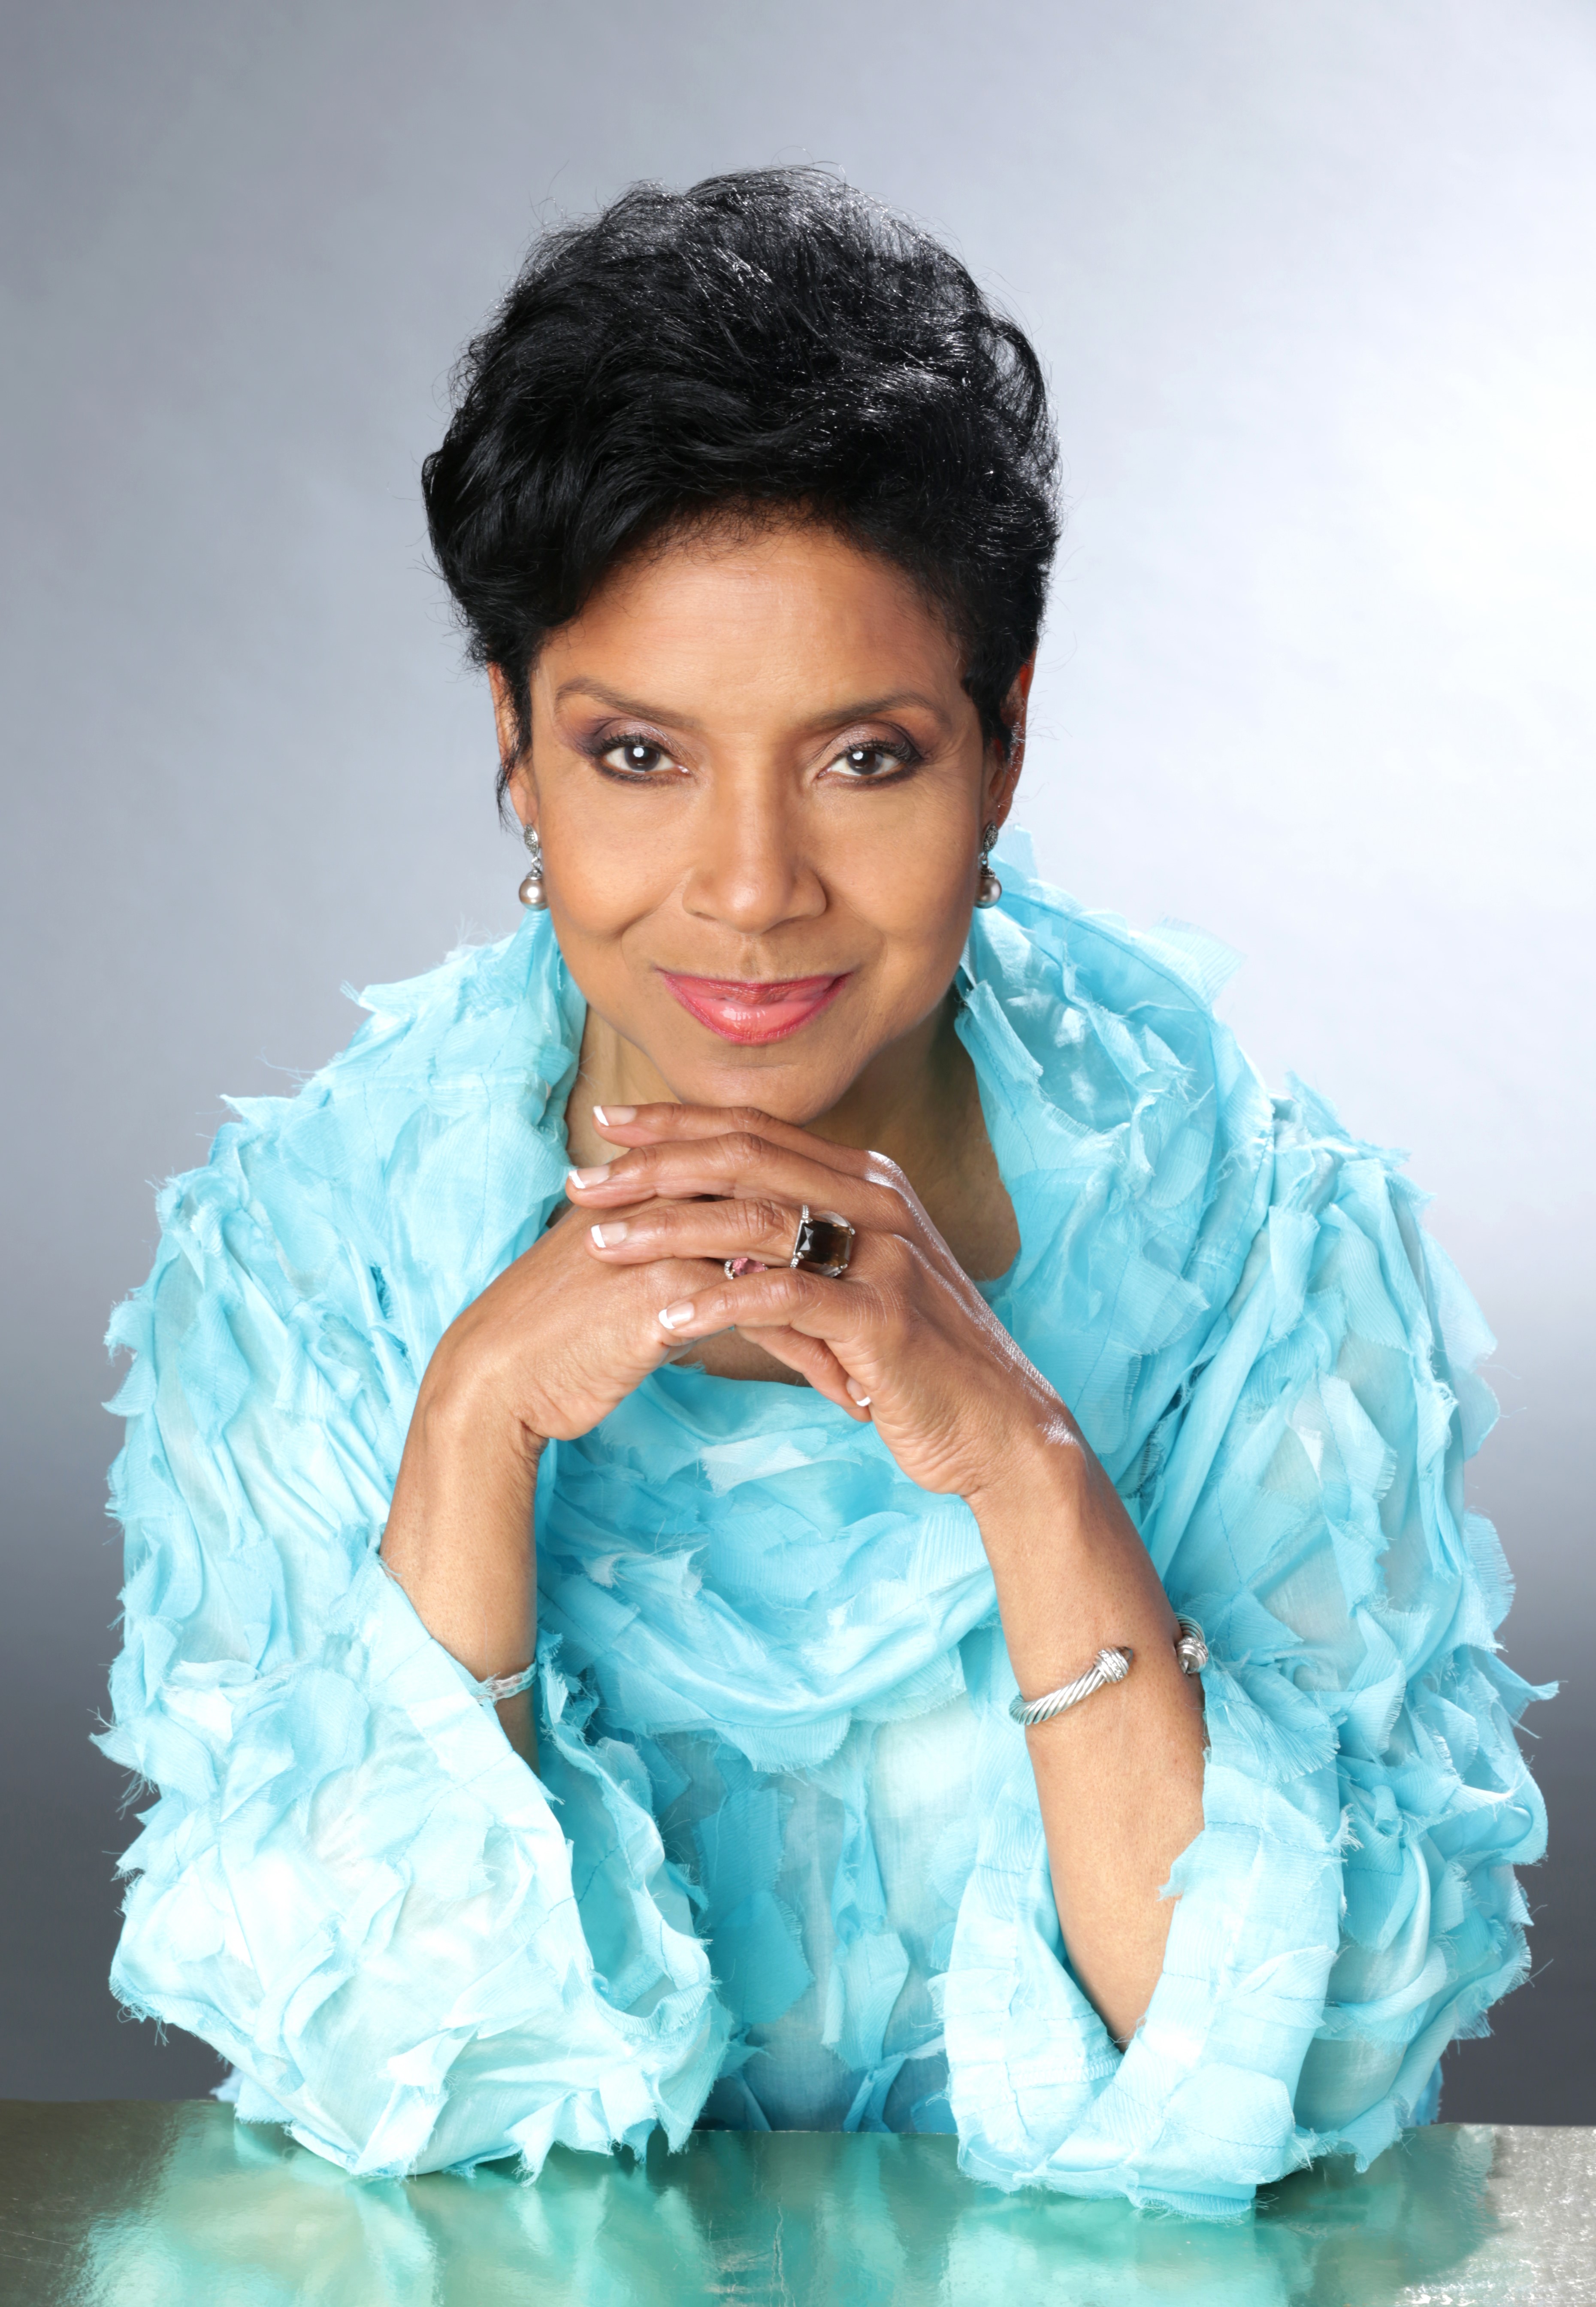 Phylicia rashad (tv actress) was born on the 19th of june, 1948. 